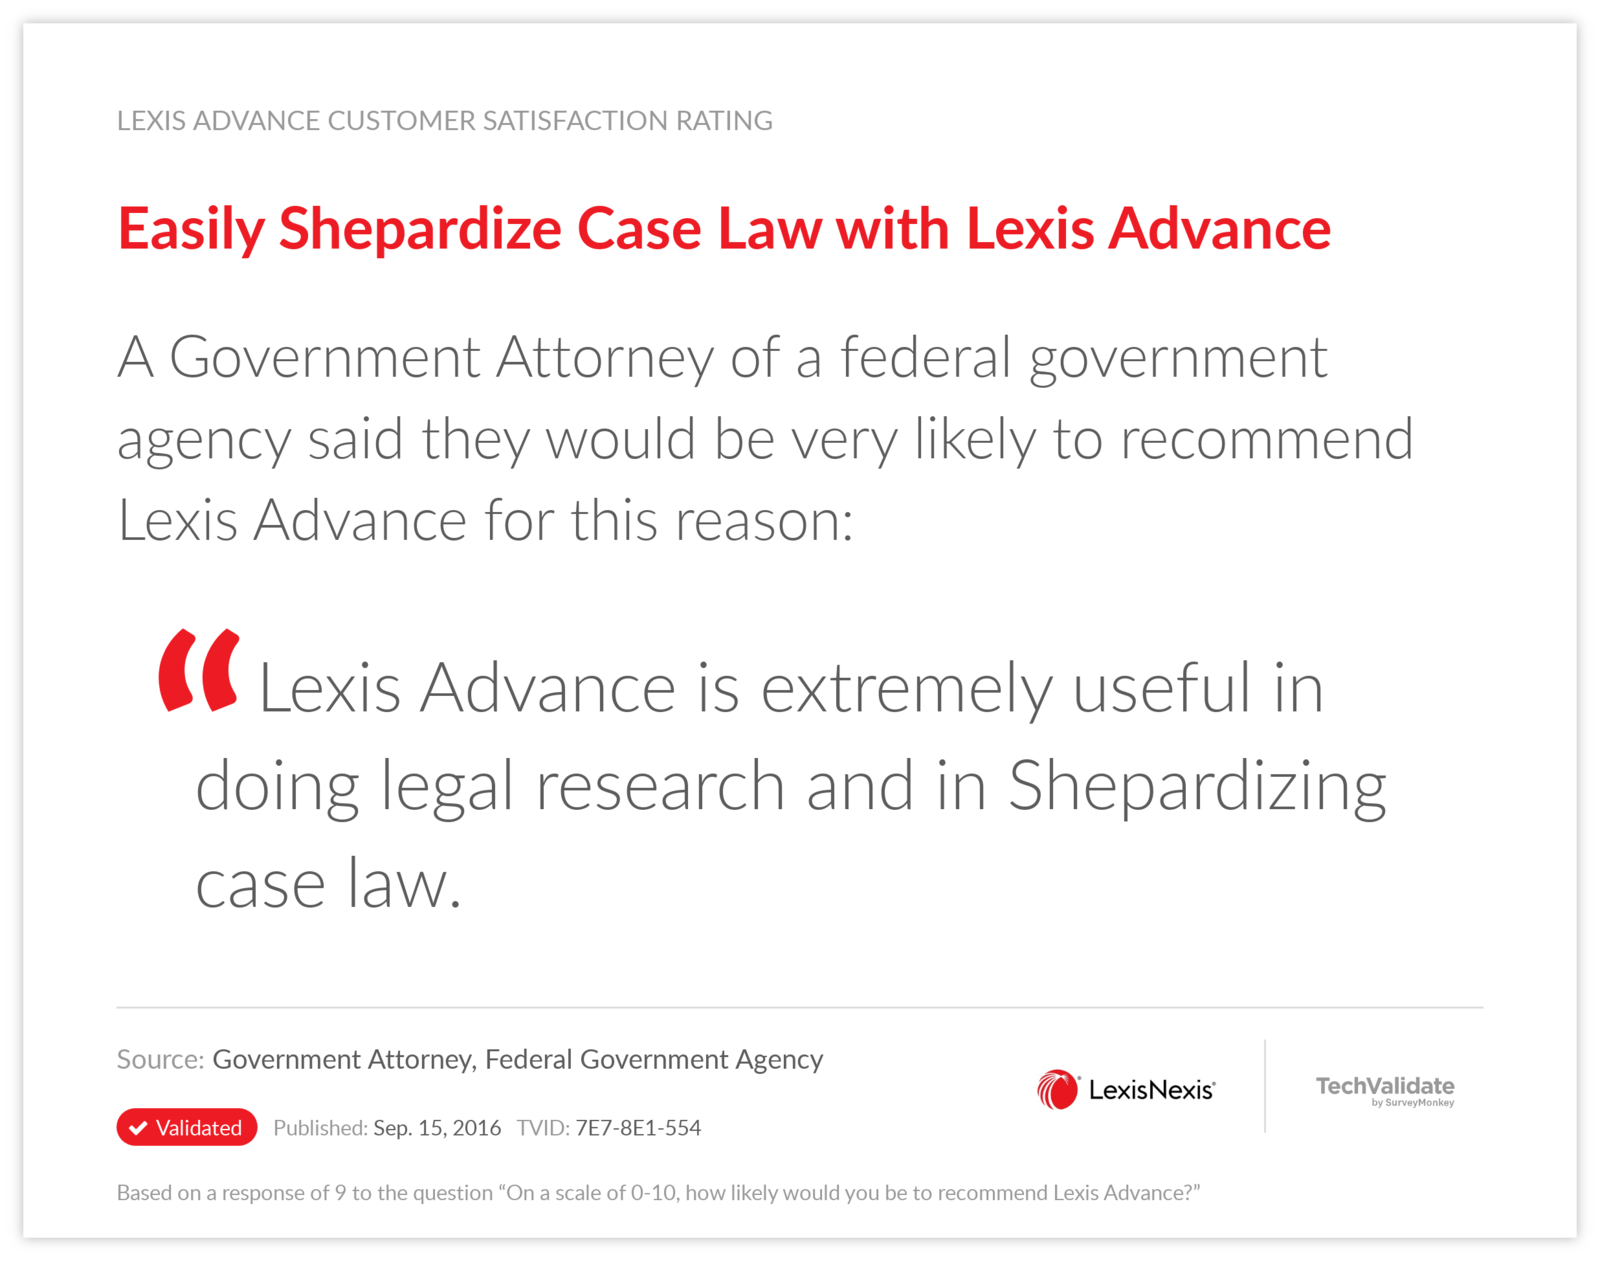 Easily Shepardize Case Law with Lexis Advance